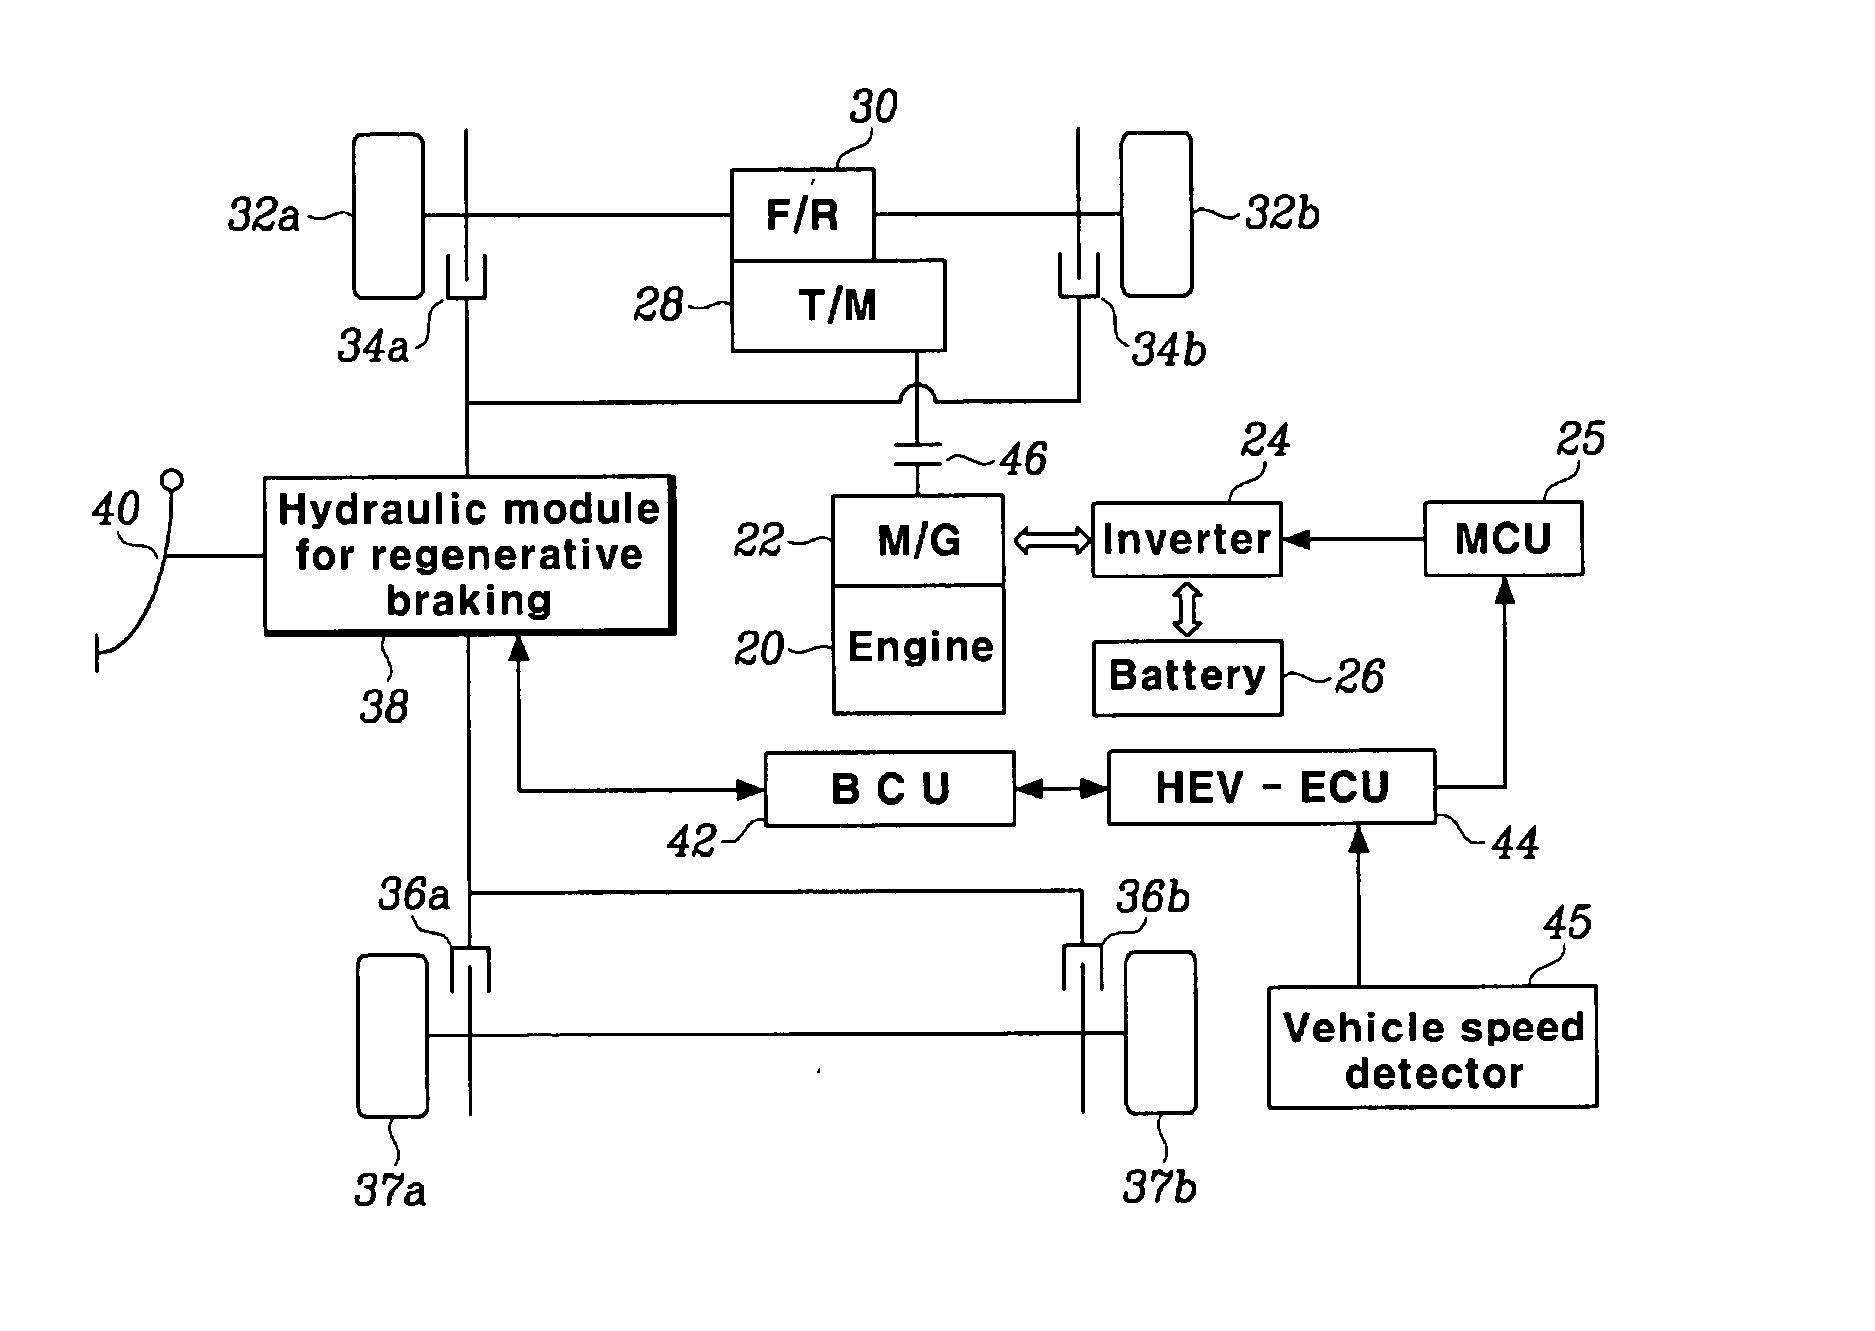 Apparatus and method for controlling regenerative braking of an electric vehicle